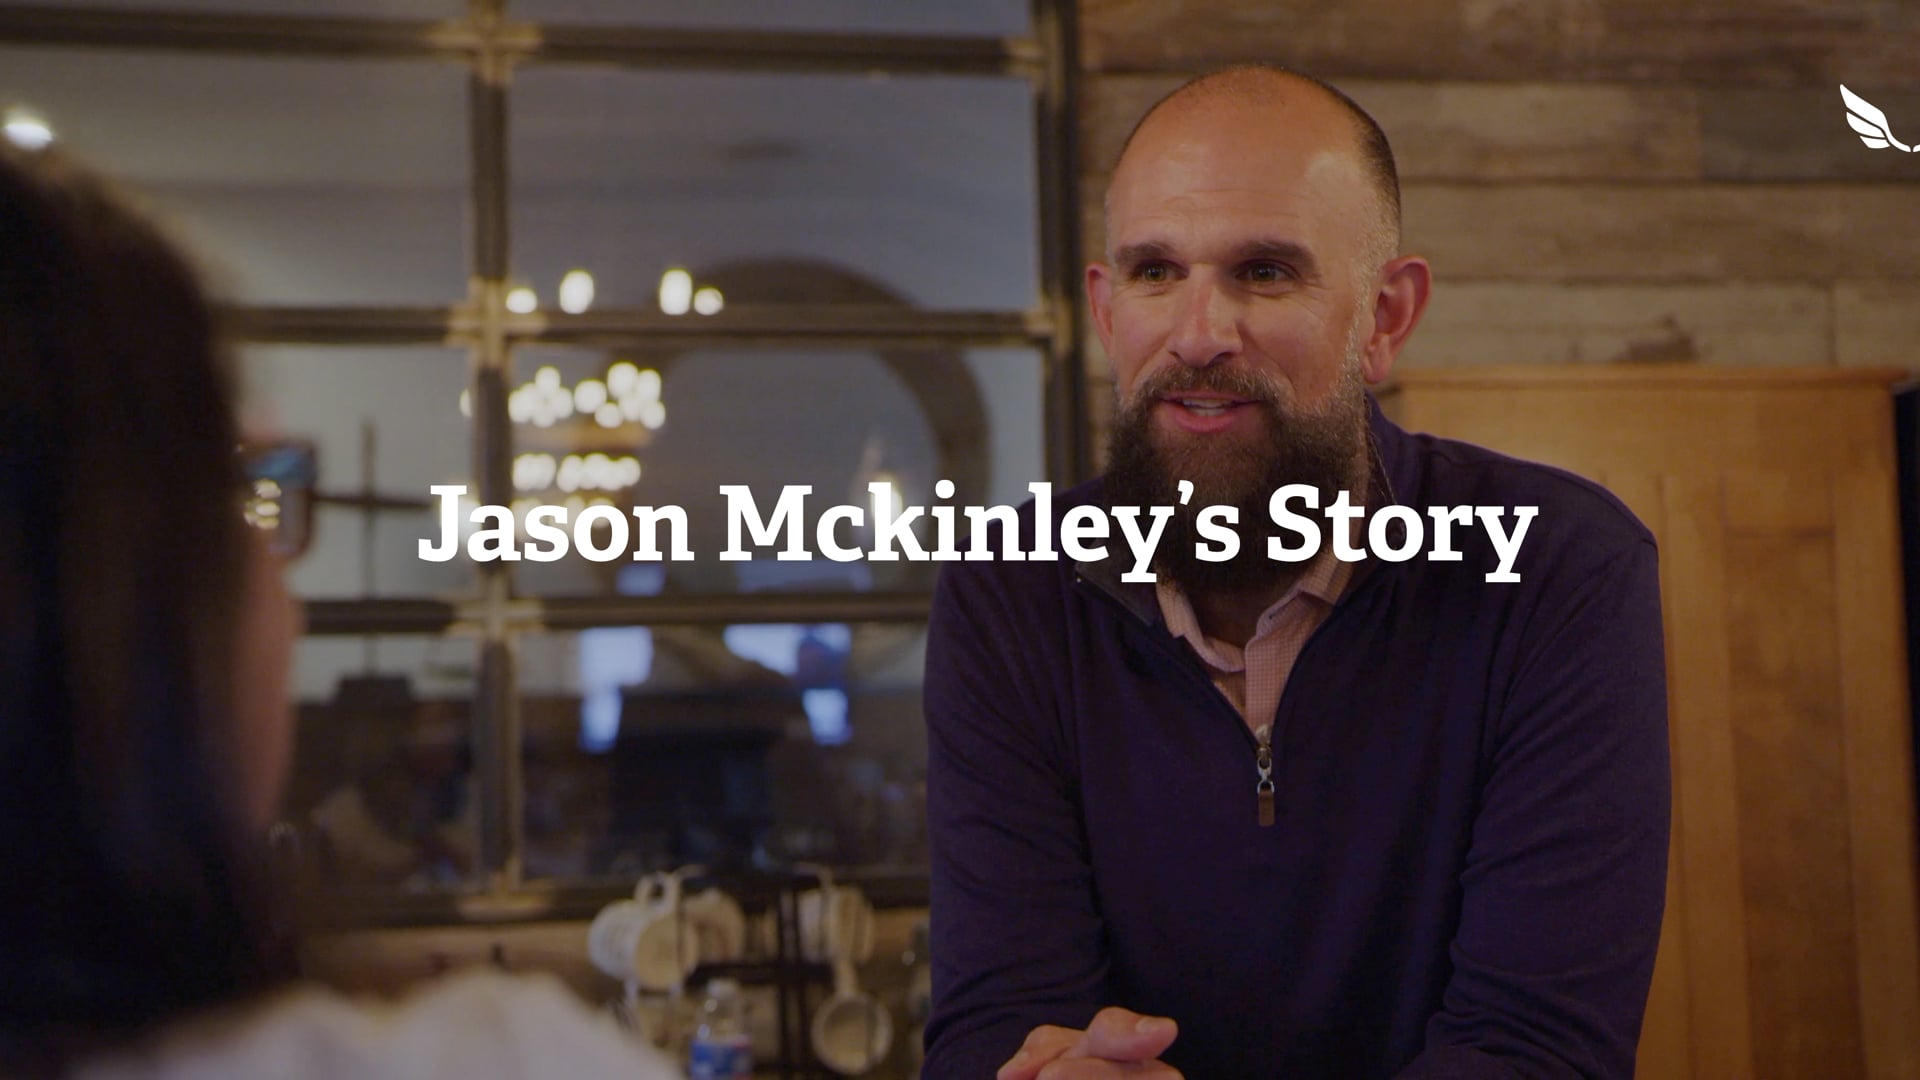 Jason's Story (A Business Owner's Experience)